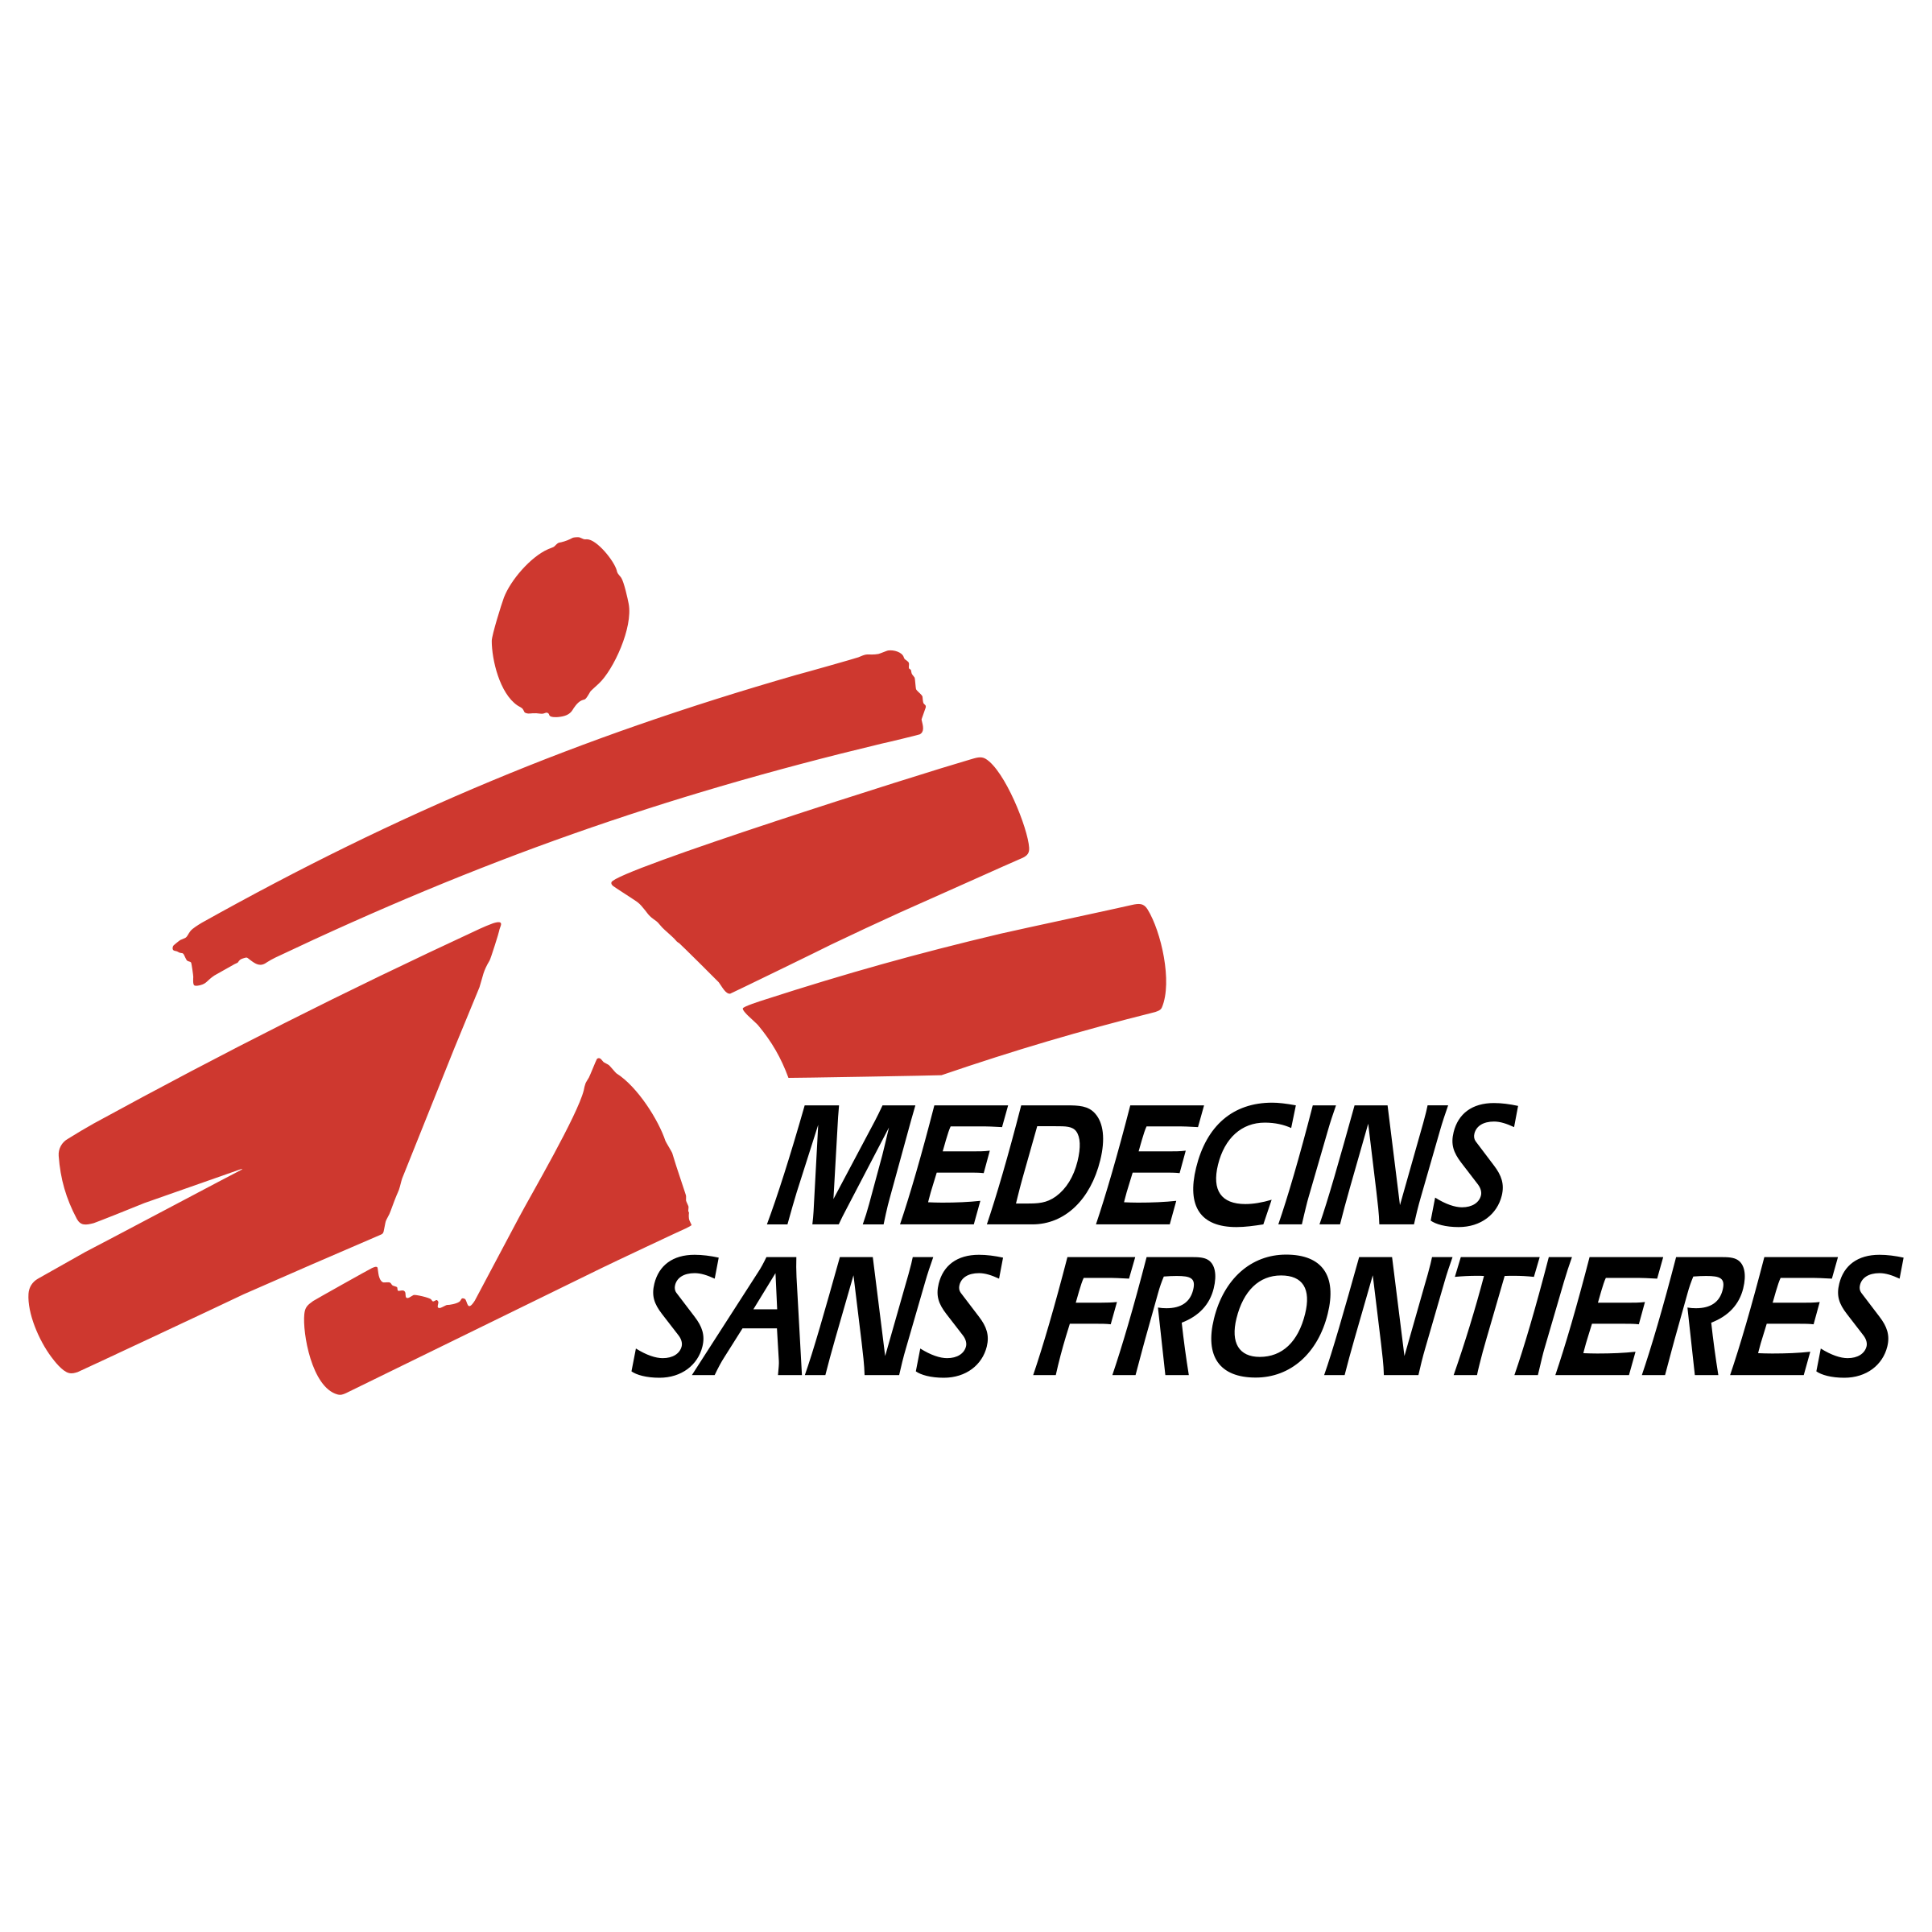 MSF (Doctors without Borders)